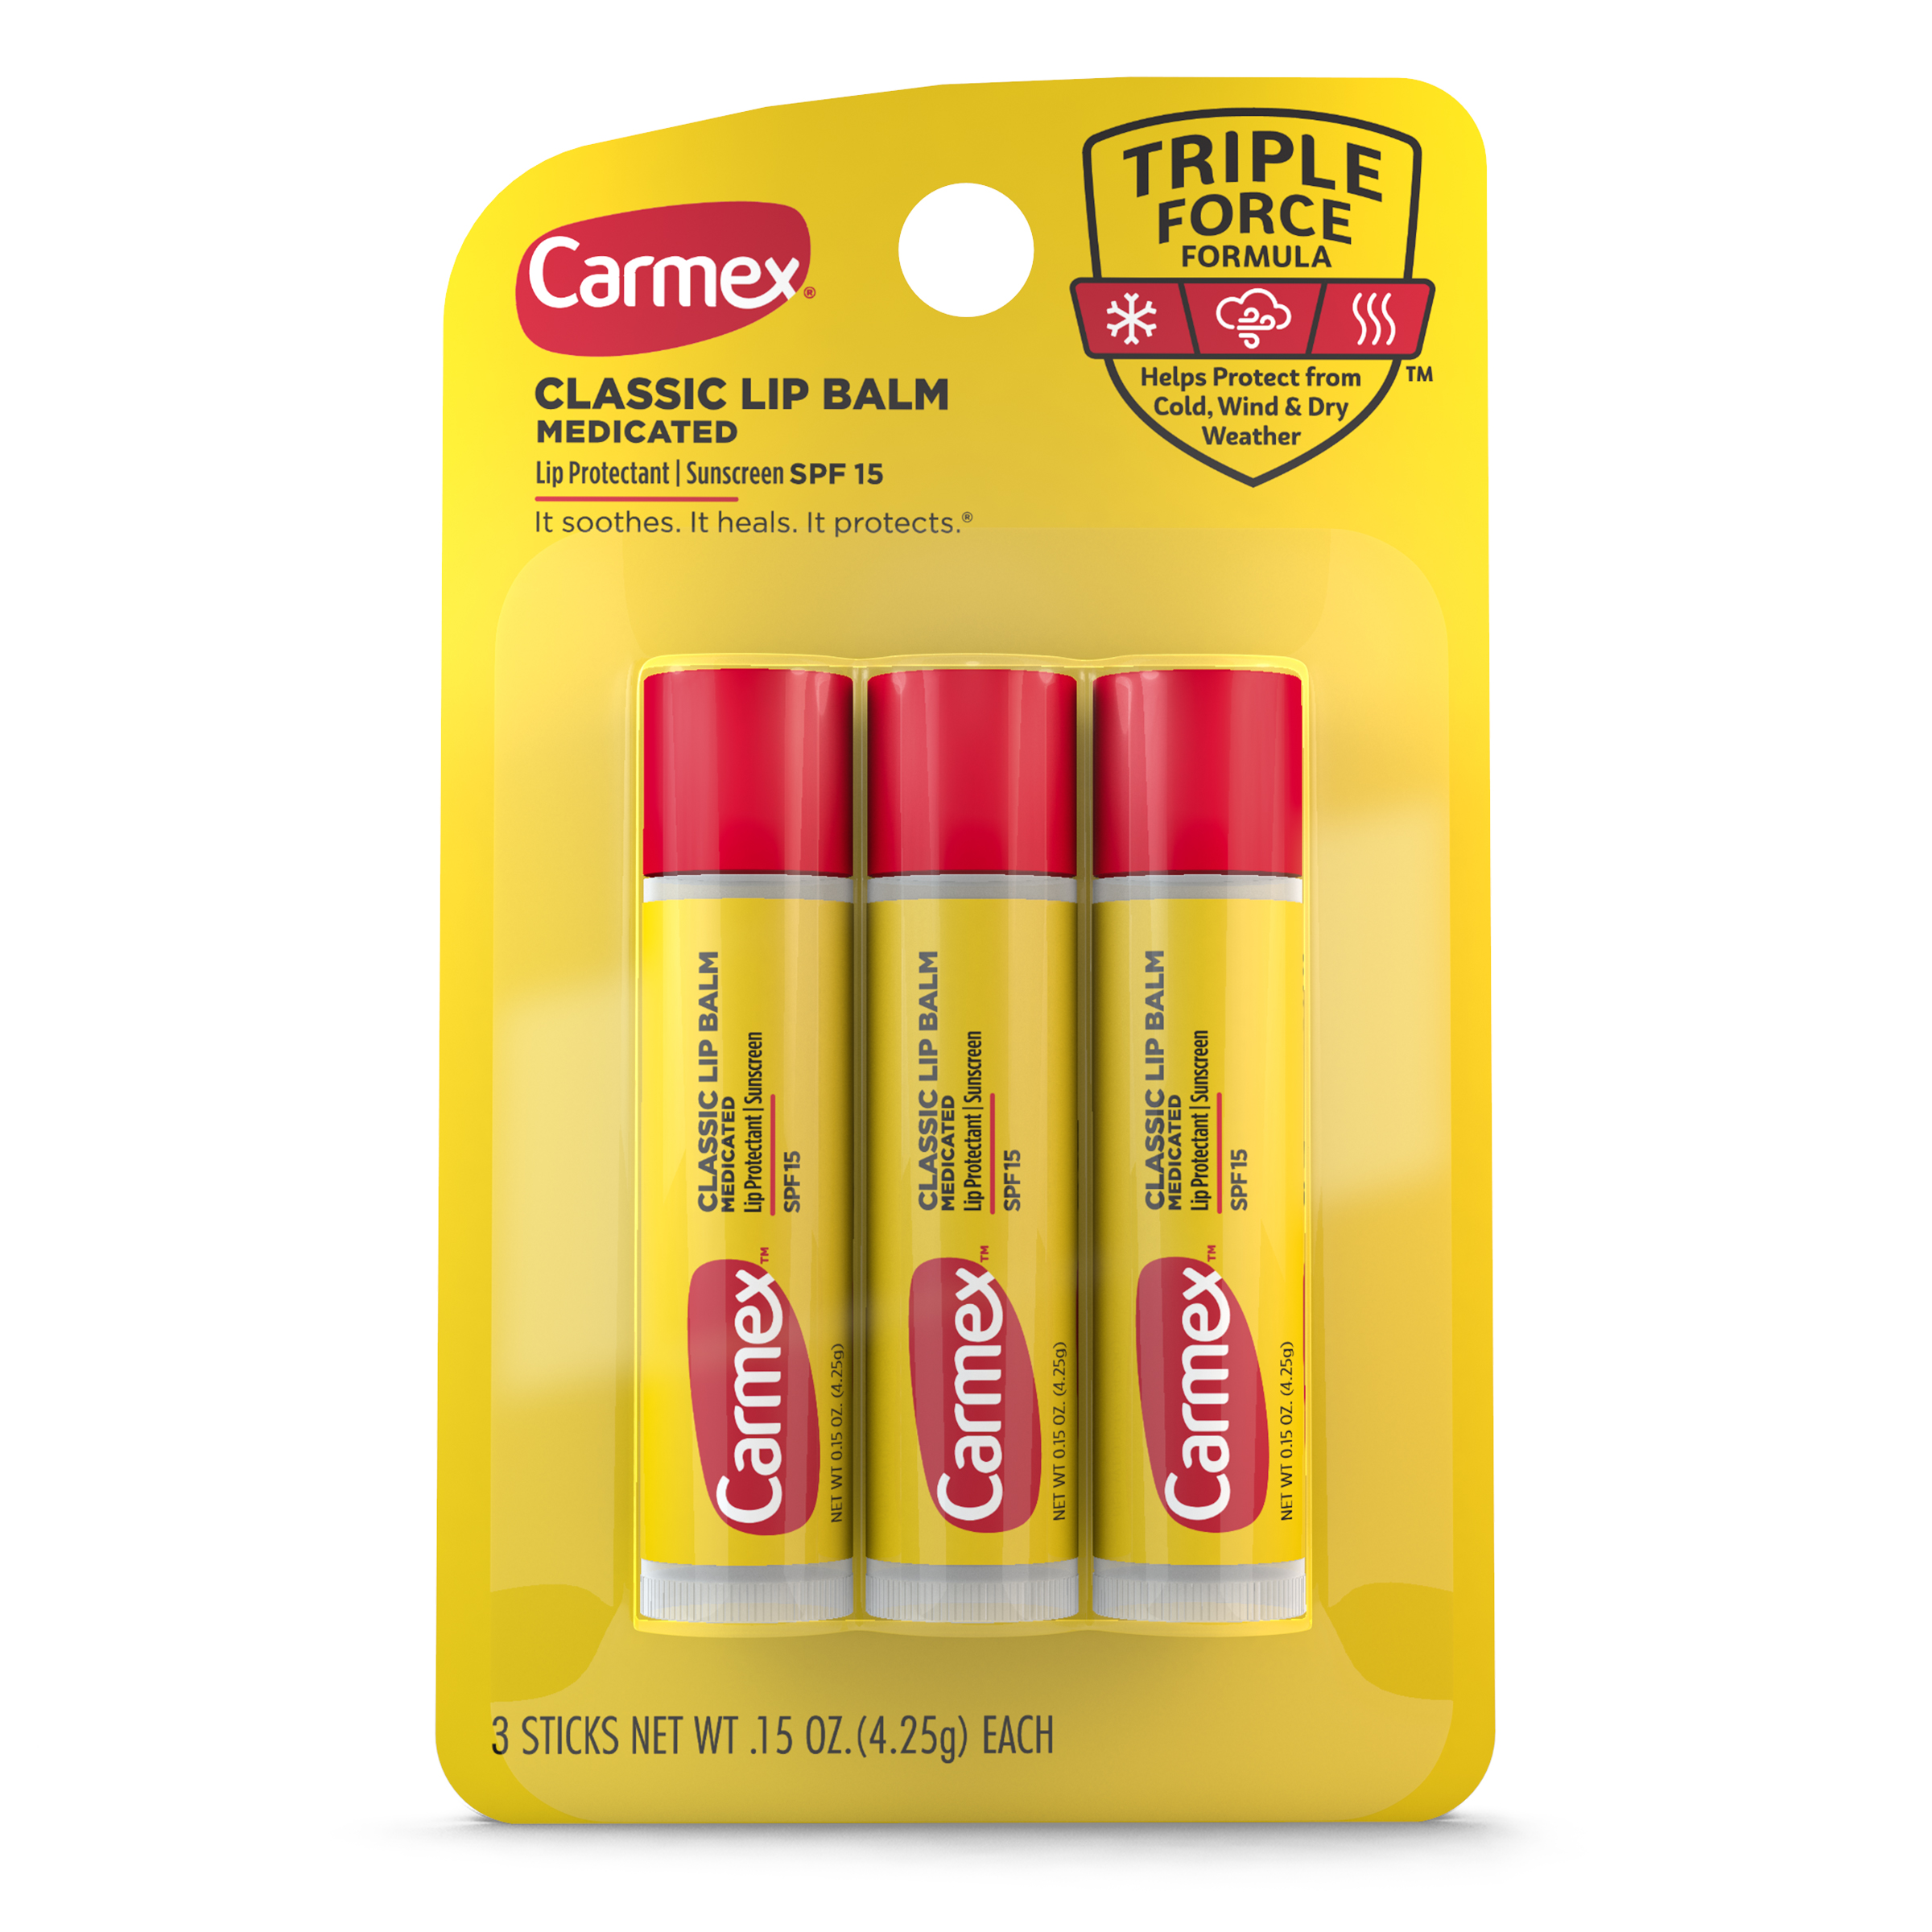 Carmex Classic Medicated Lip Balm Sticks, Lip Moisturizer, SPF 15, 3 Count (1 Pack of 3) - image 10 of 11